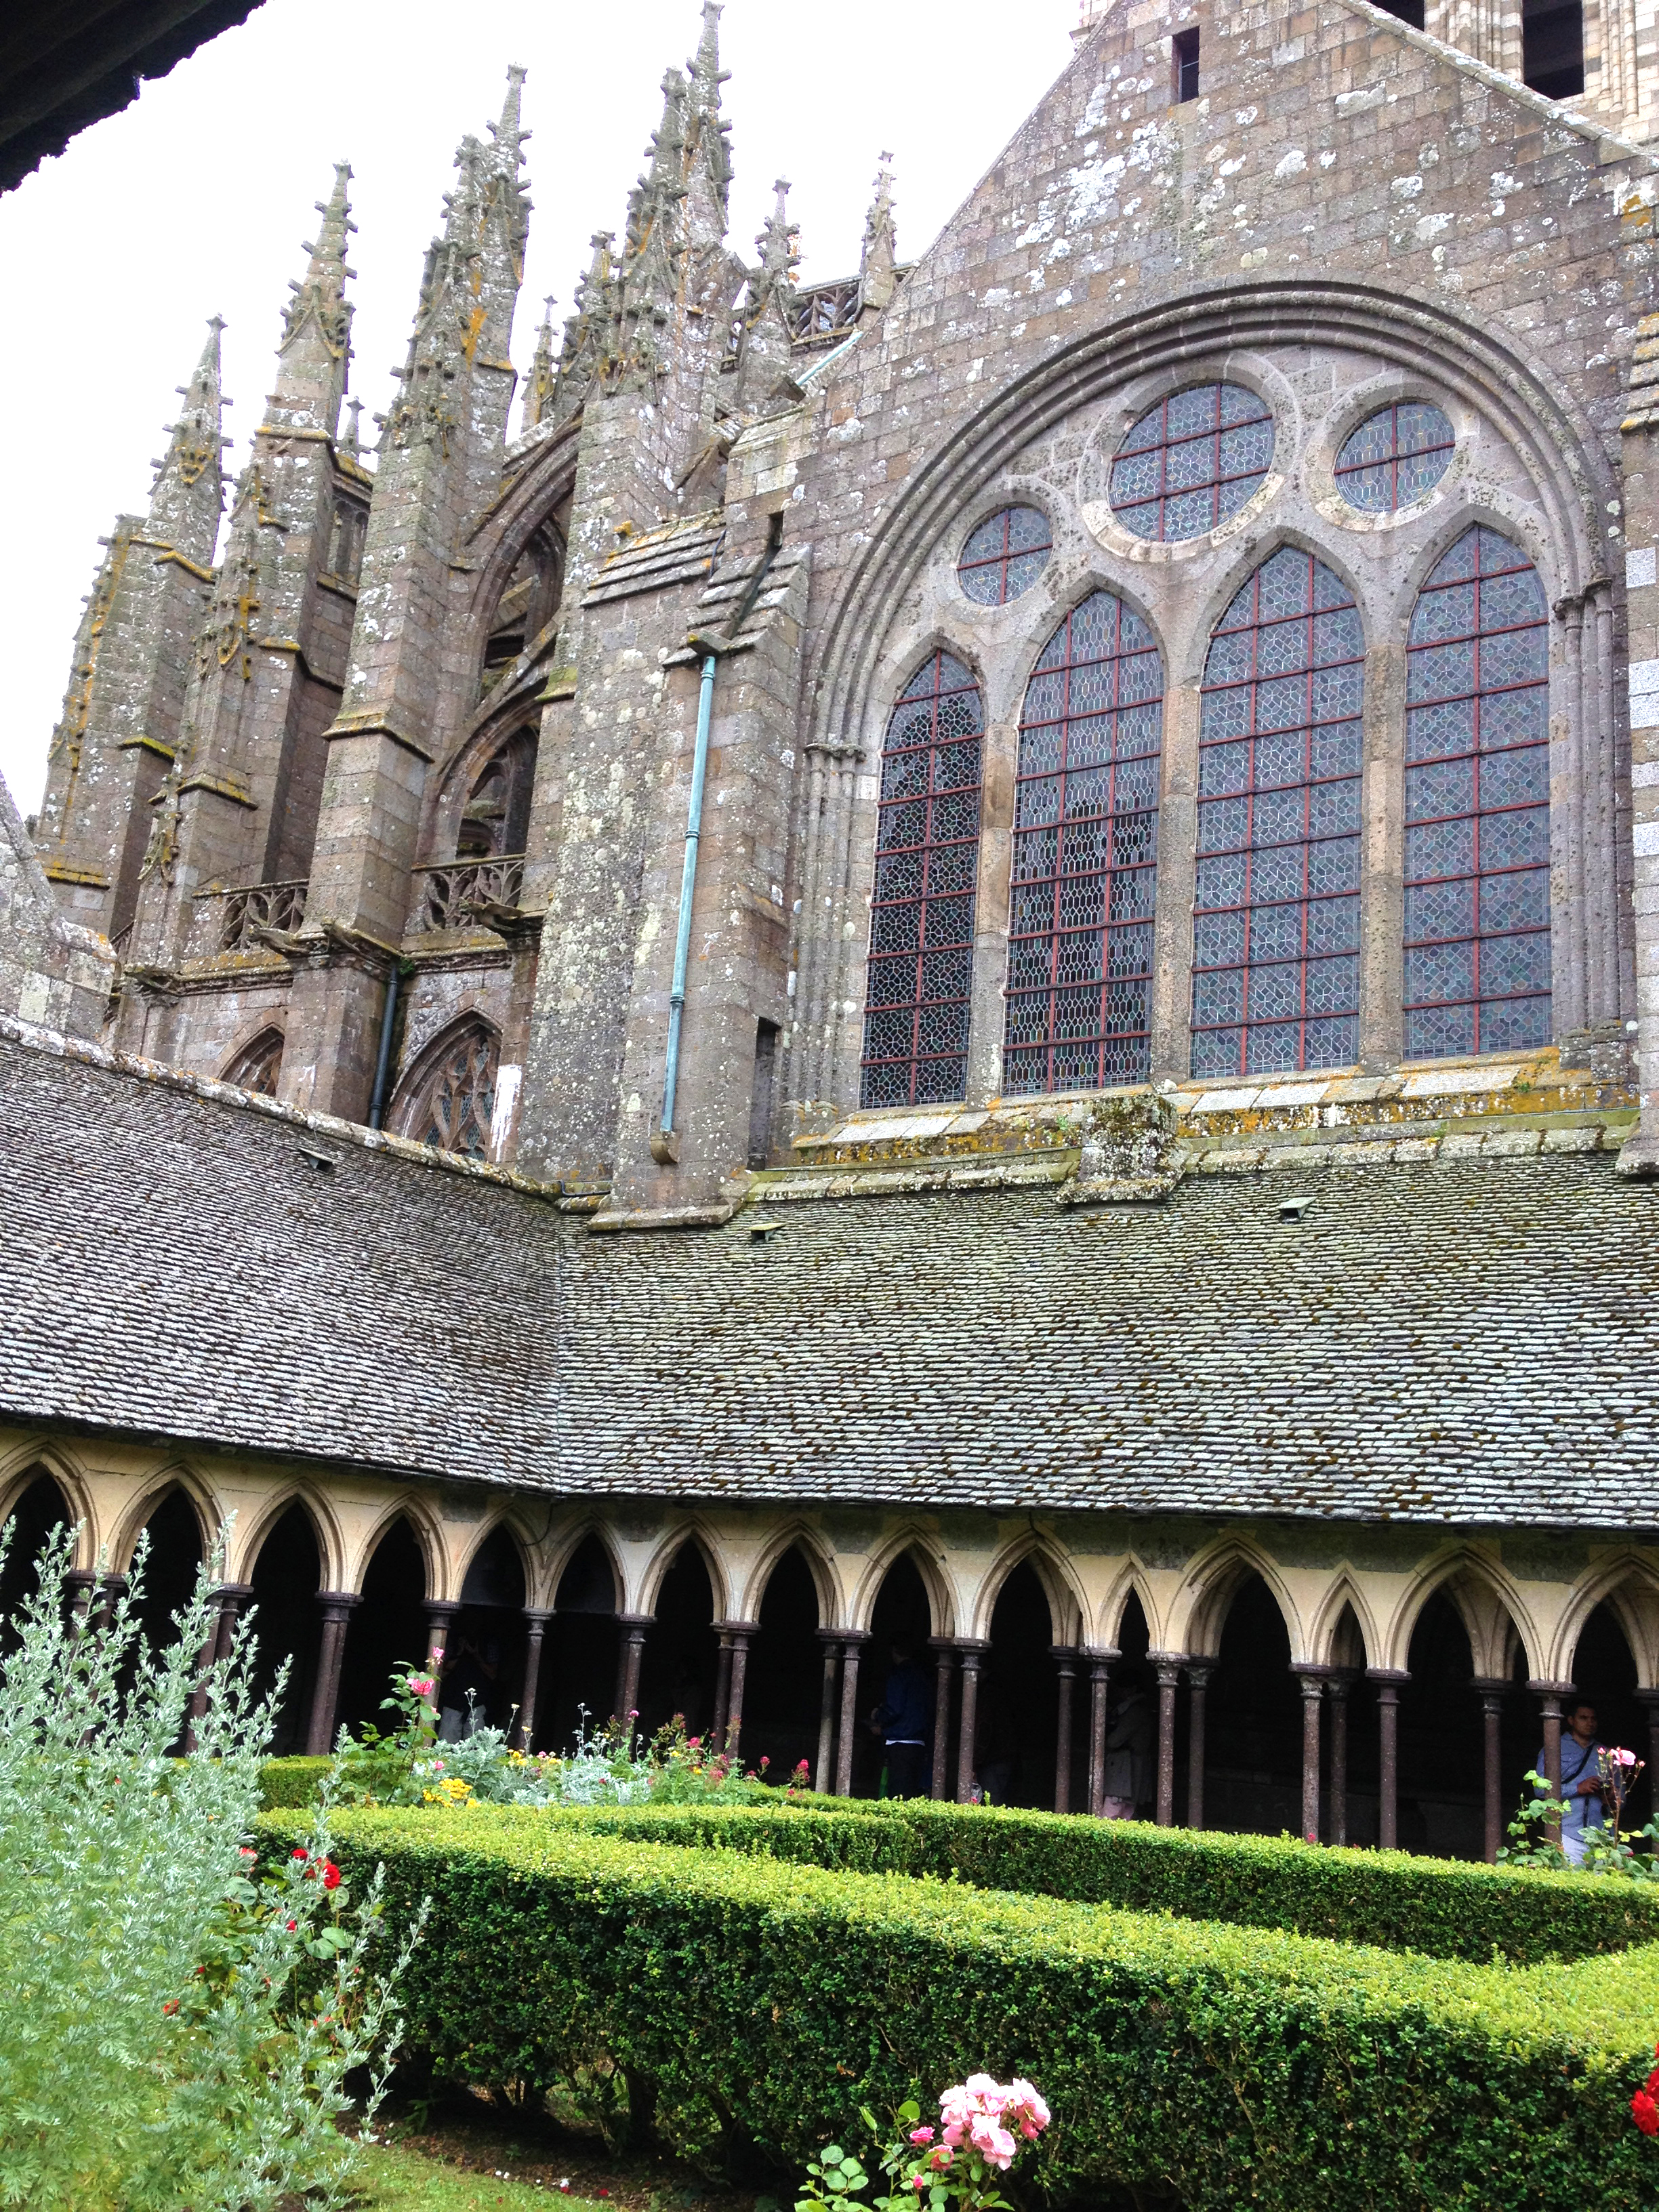  The abbey has a secret roof-top garden framed by gorgeous, crumbling pointed arches. 